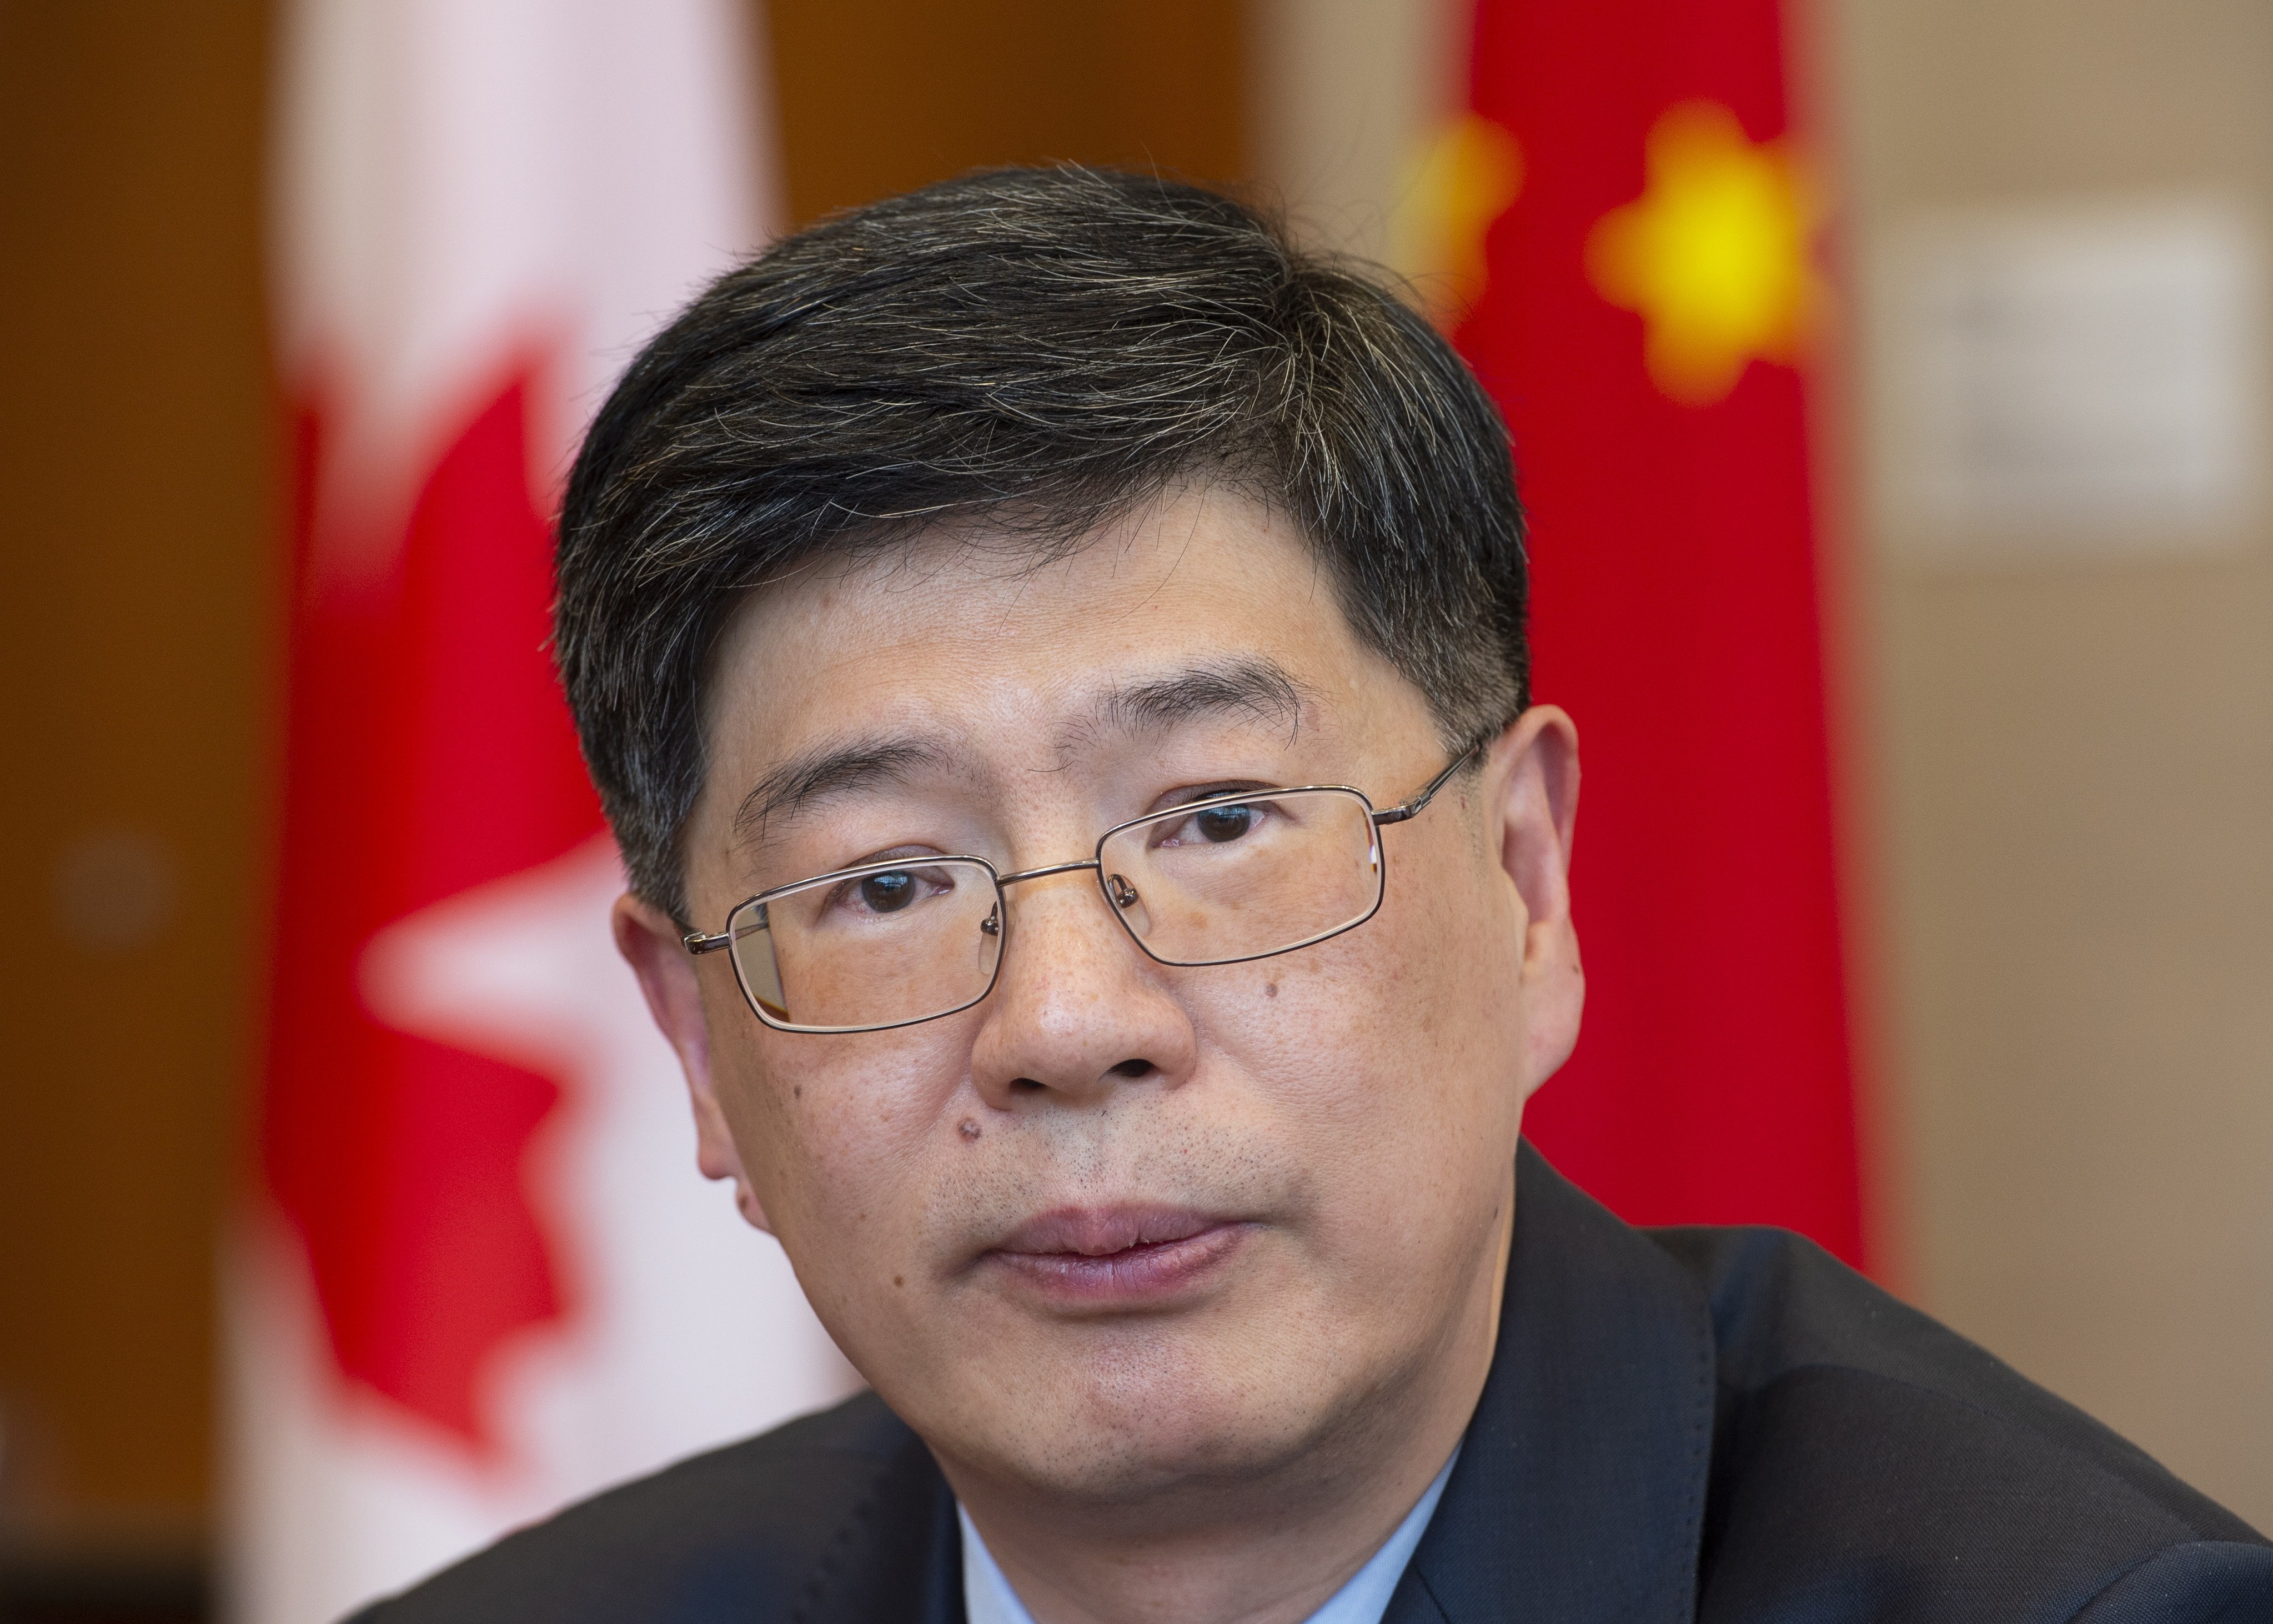 China’s Ambassador to Canada Cong Peiwu speaks to journalists at the Chinese embassy in Ottawa in November 2019. Photo: Canadian Press via AP